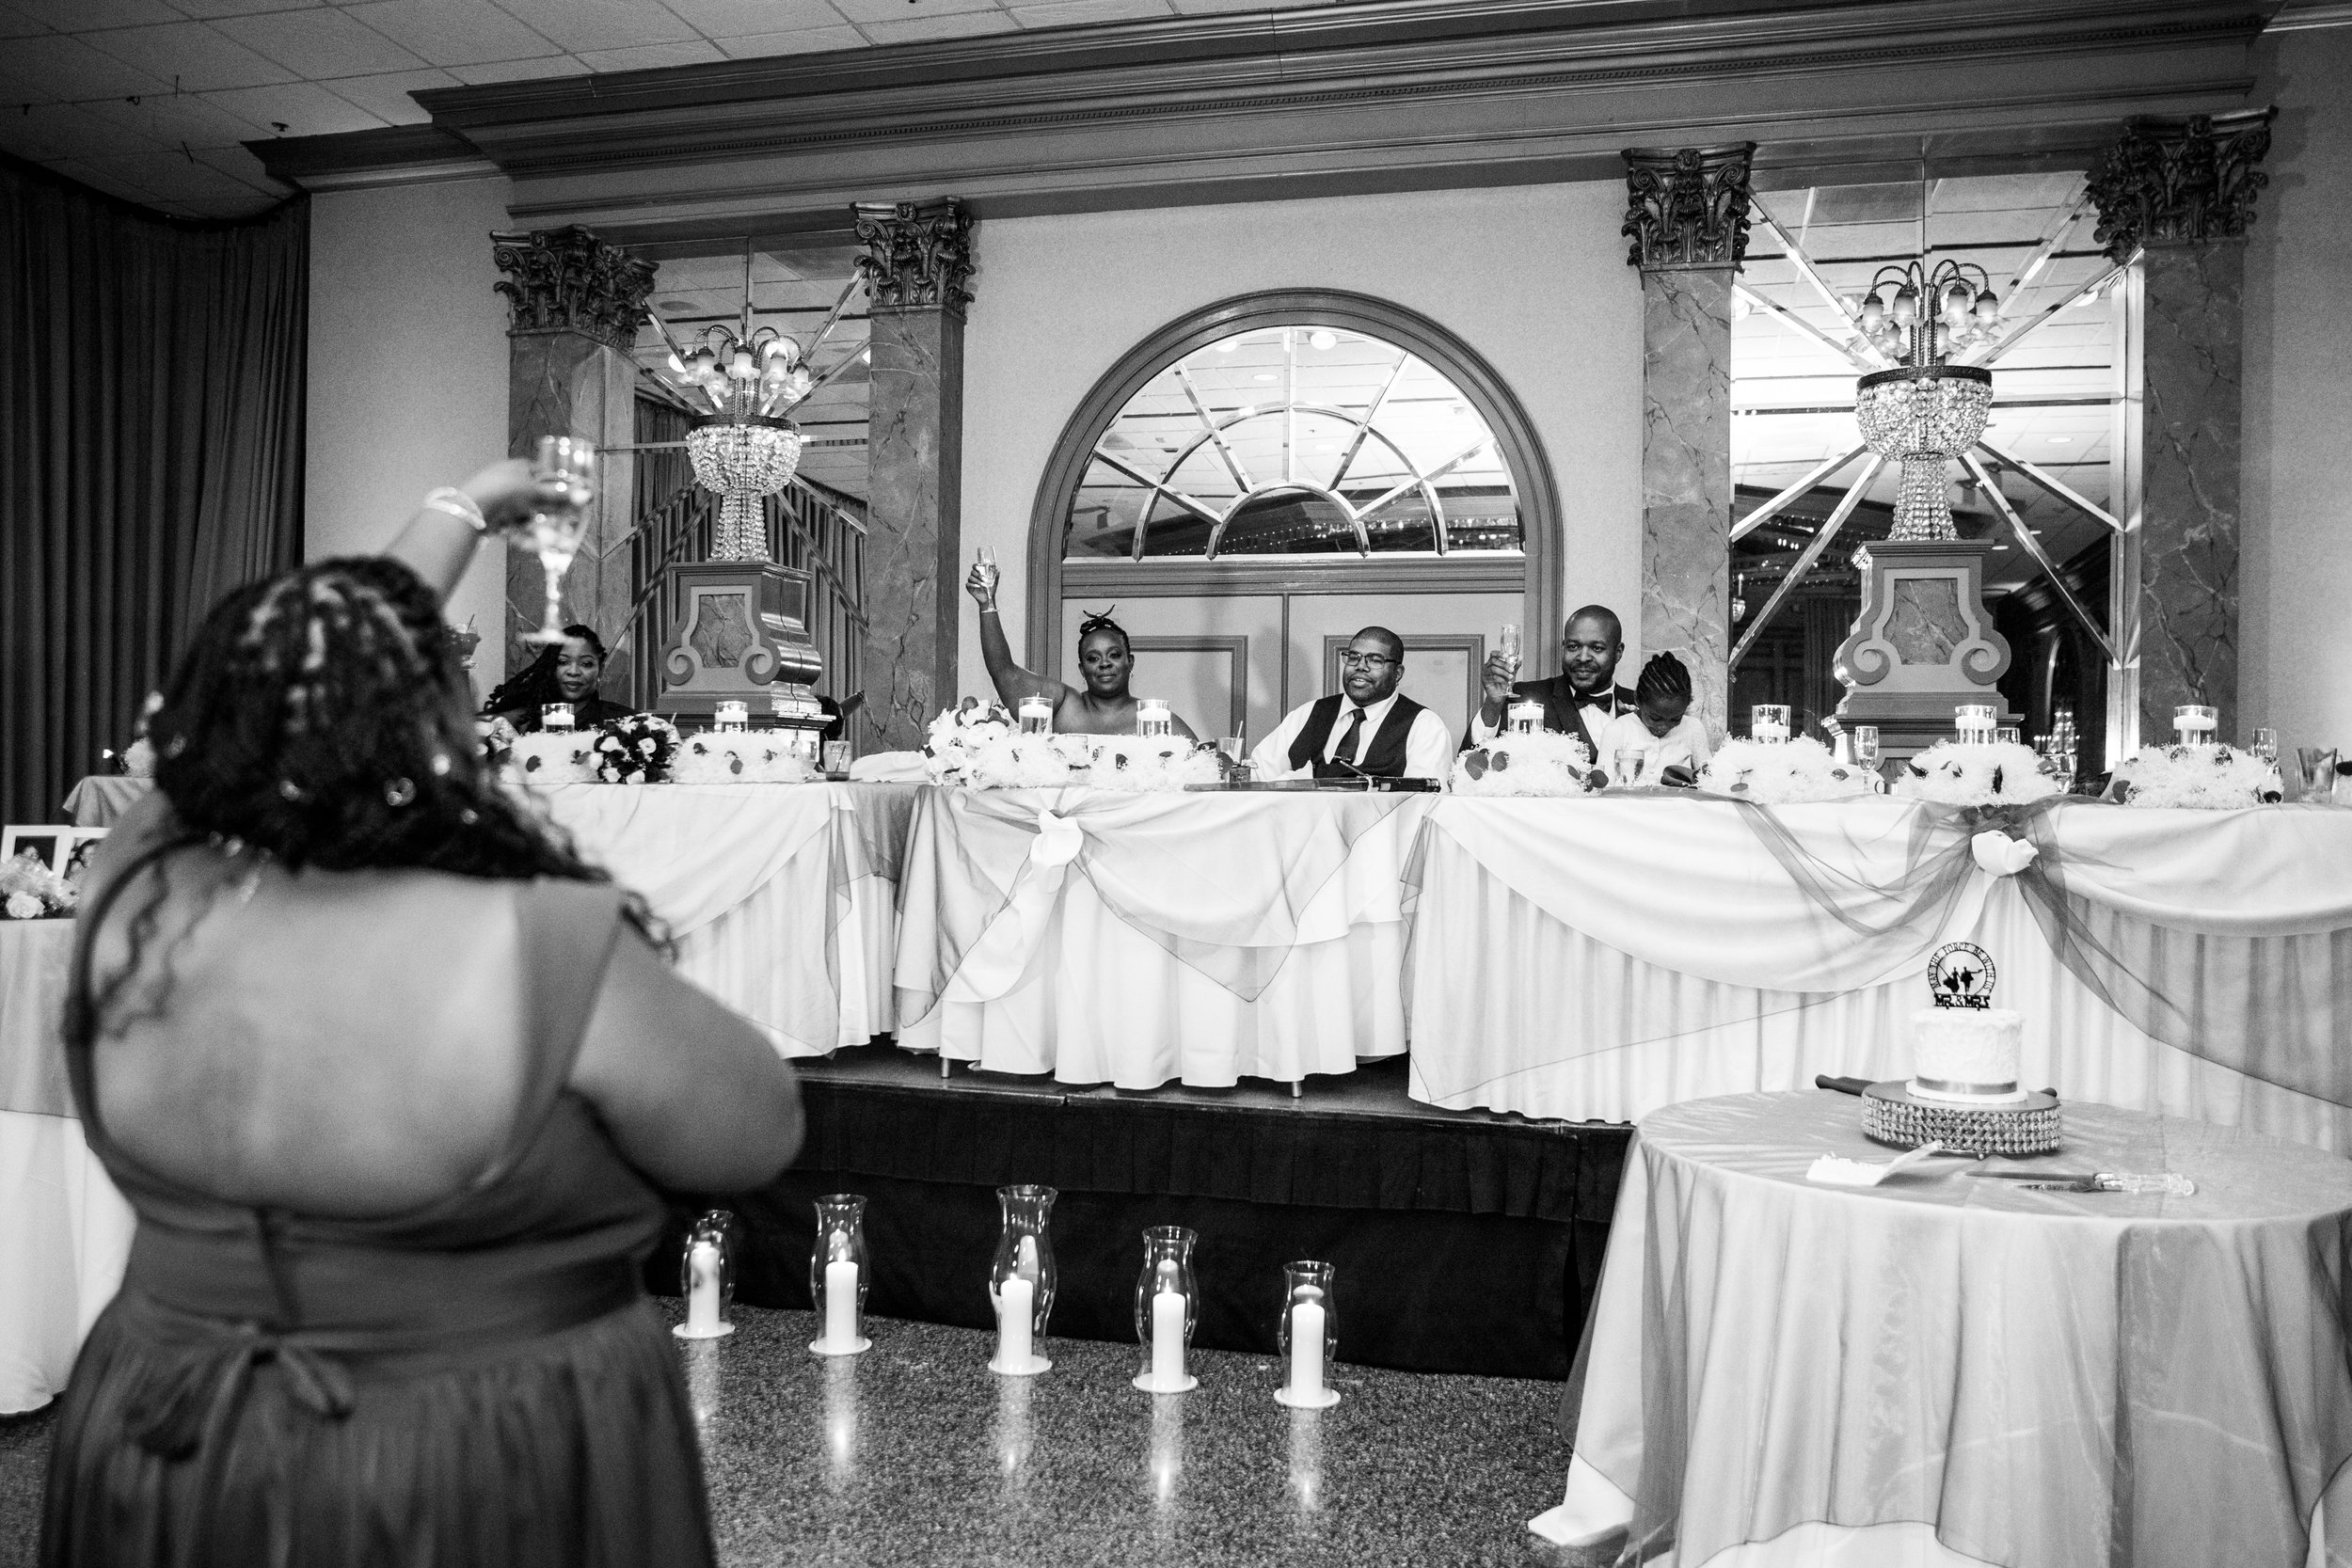 Harry Potter and Star Wars Themed Wedding at Martins West in Baltimore Maryland Shot by Megapixels Media Photography-45.jpg